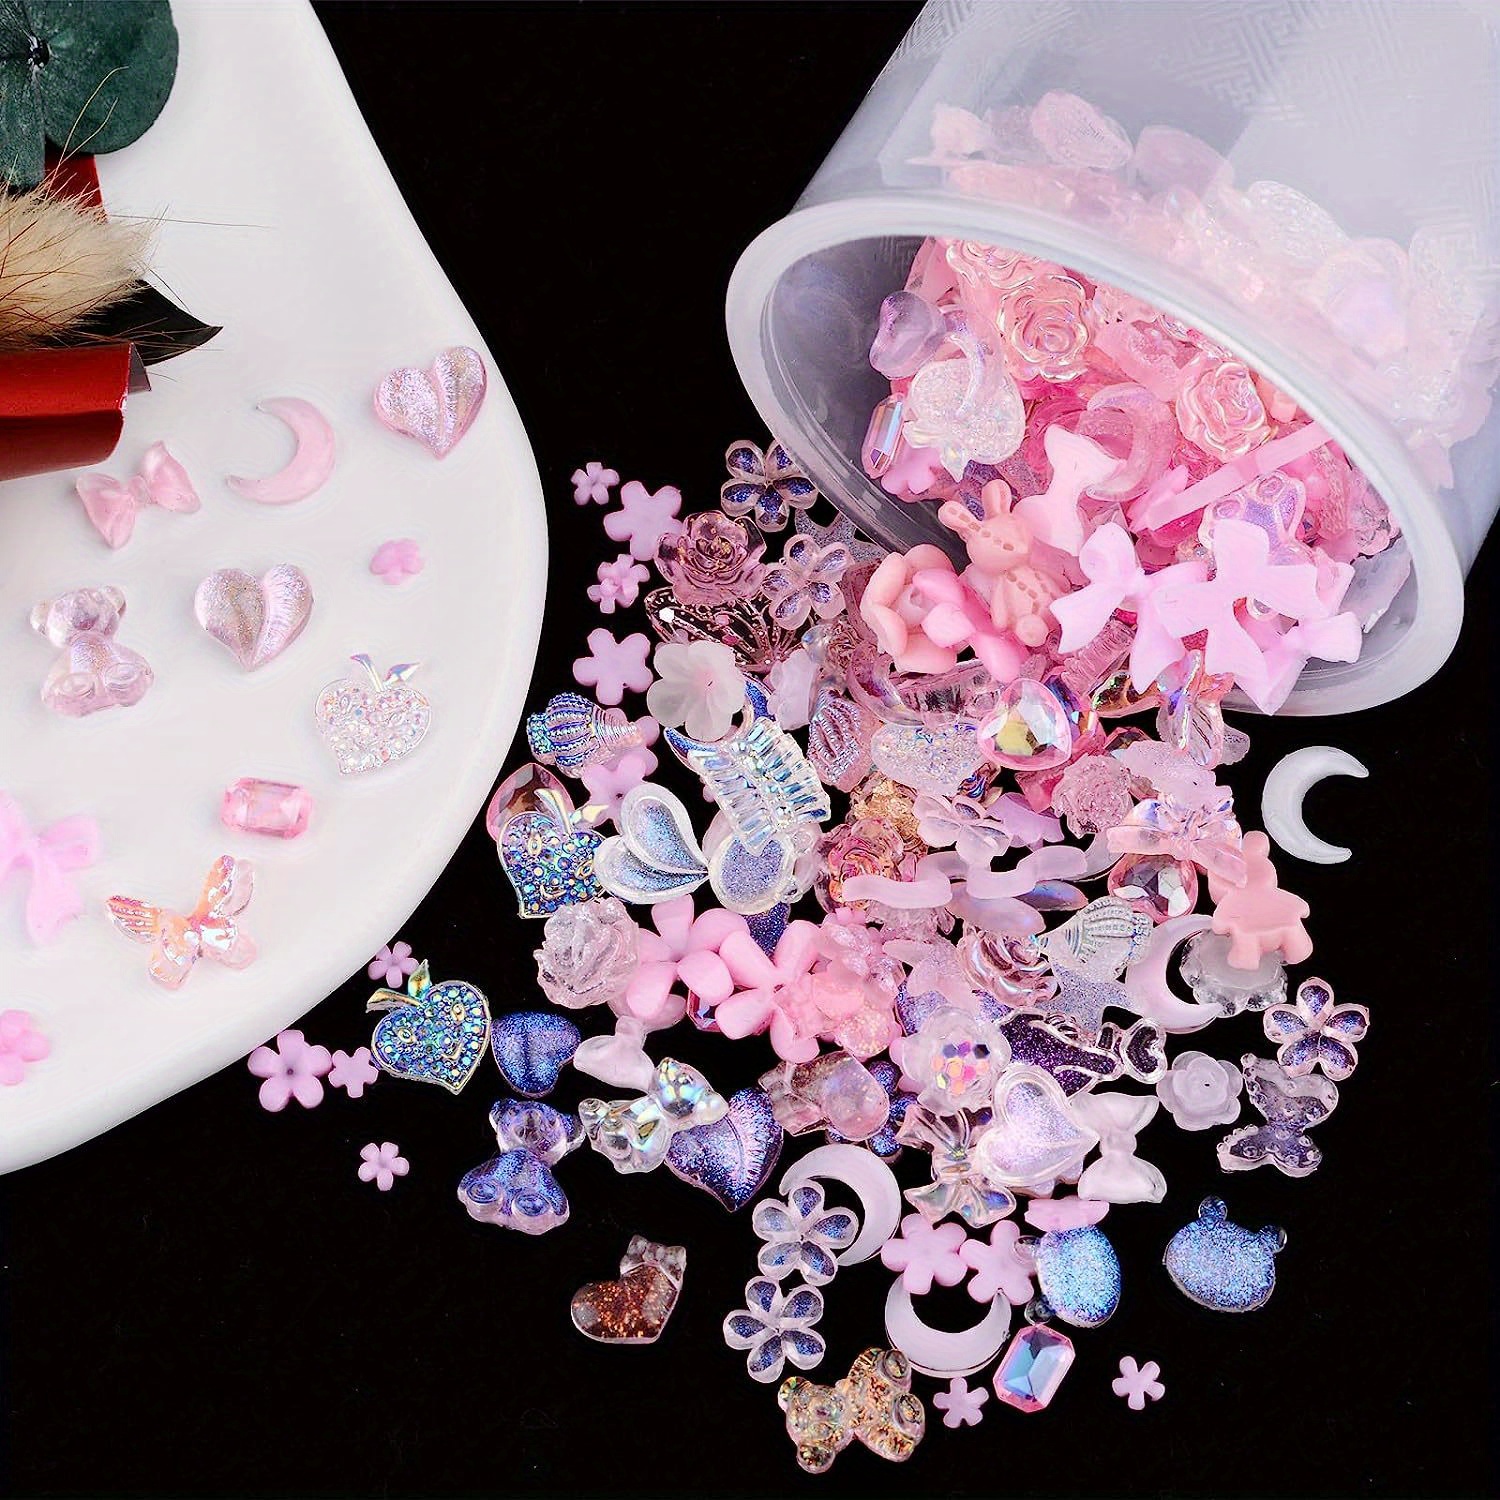  500Pcs Purple Flower Nail Charms Mixed Shape Rose Flower Bear  Bow Heart 3D Acrylic Charms for Nails Design Flatback White Half Round  Pearls Beads for Nail Art Decoration DIY Crafts Jewelry